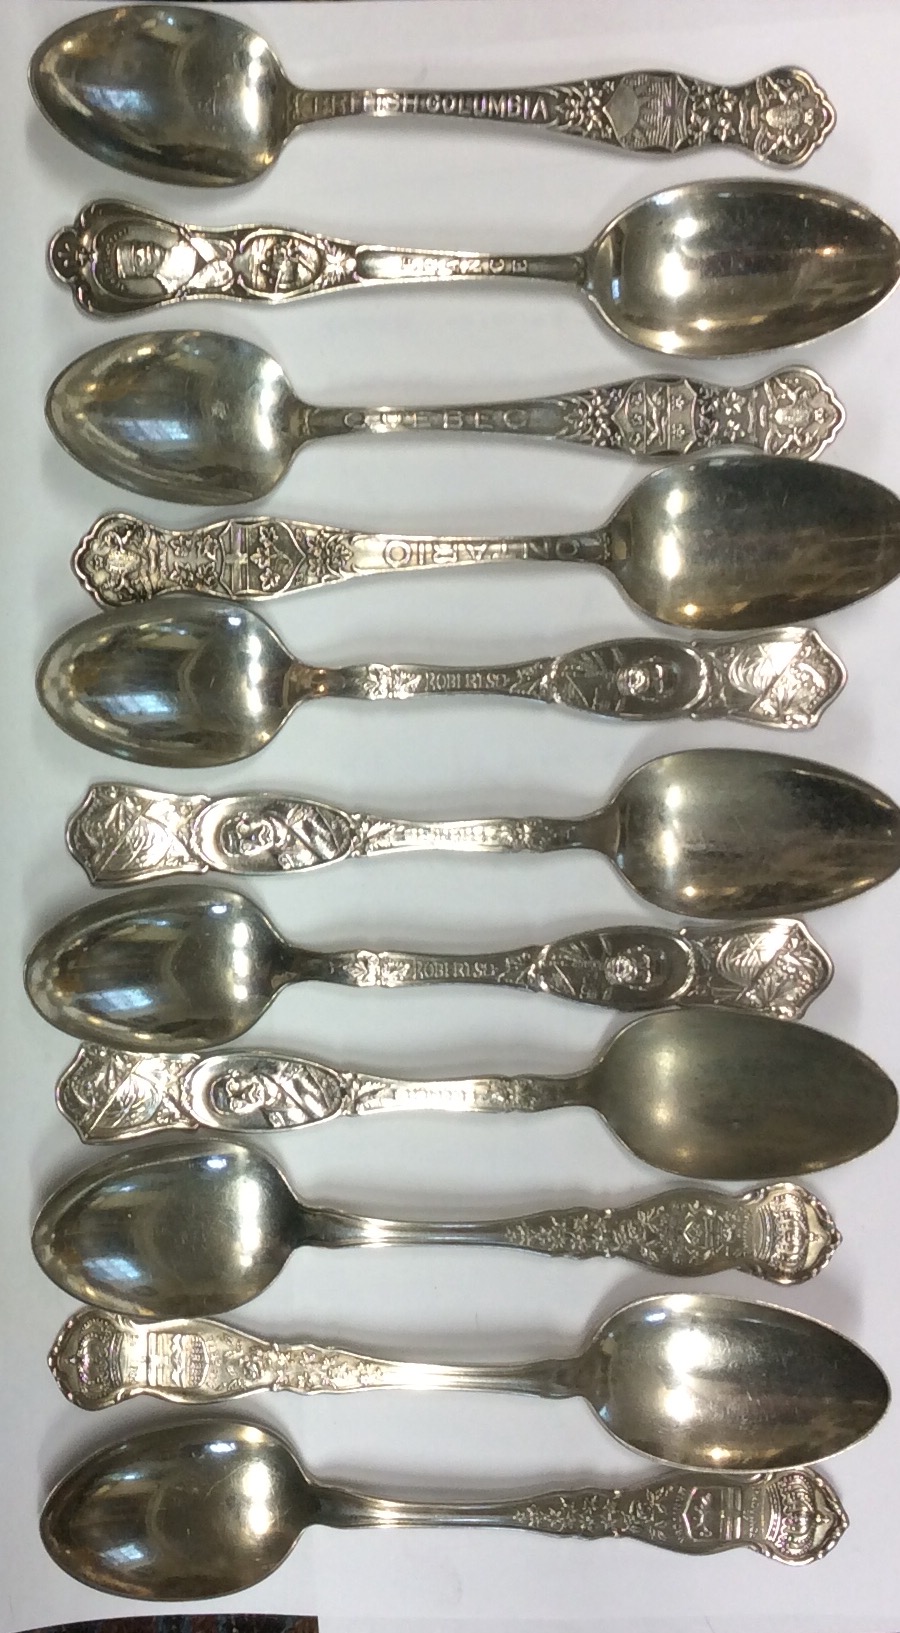 A COLLECTION OF VINTAGE SILVER PLATE COMMEMORATIVE SPOONS Depicting Lord Rogers and Field Marshall